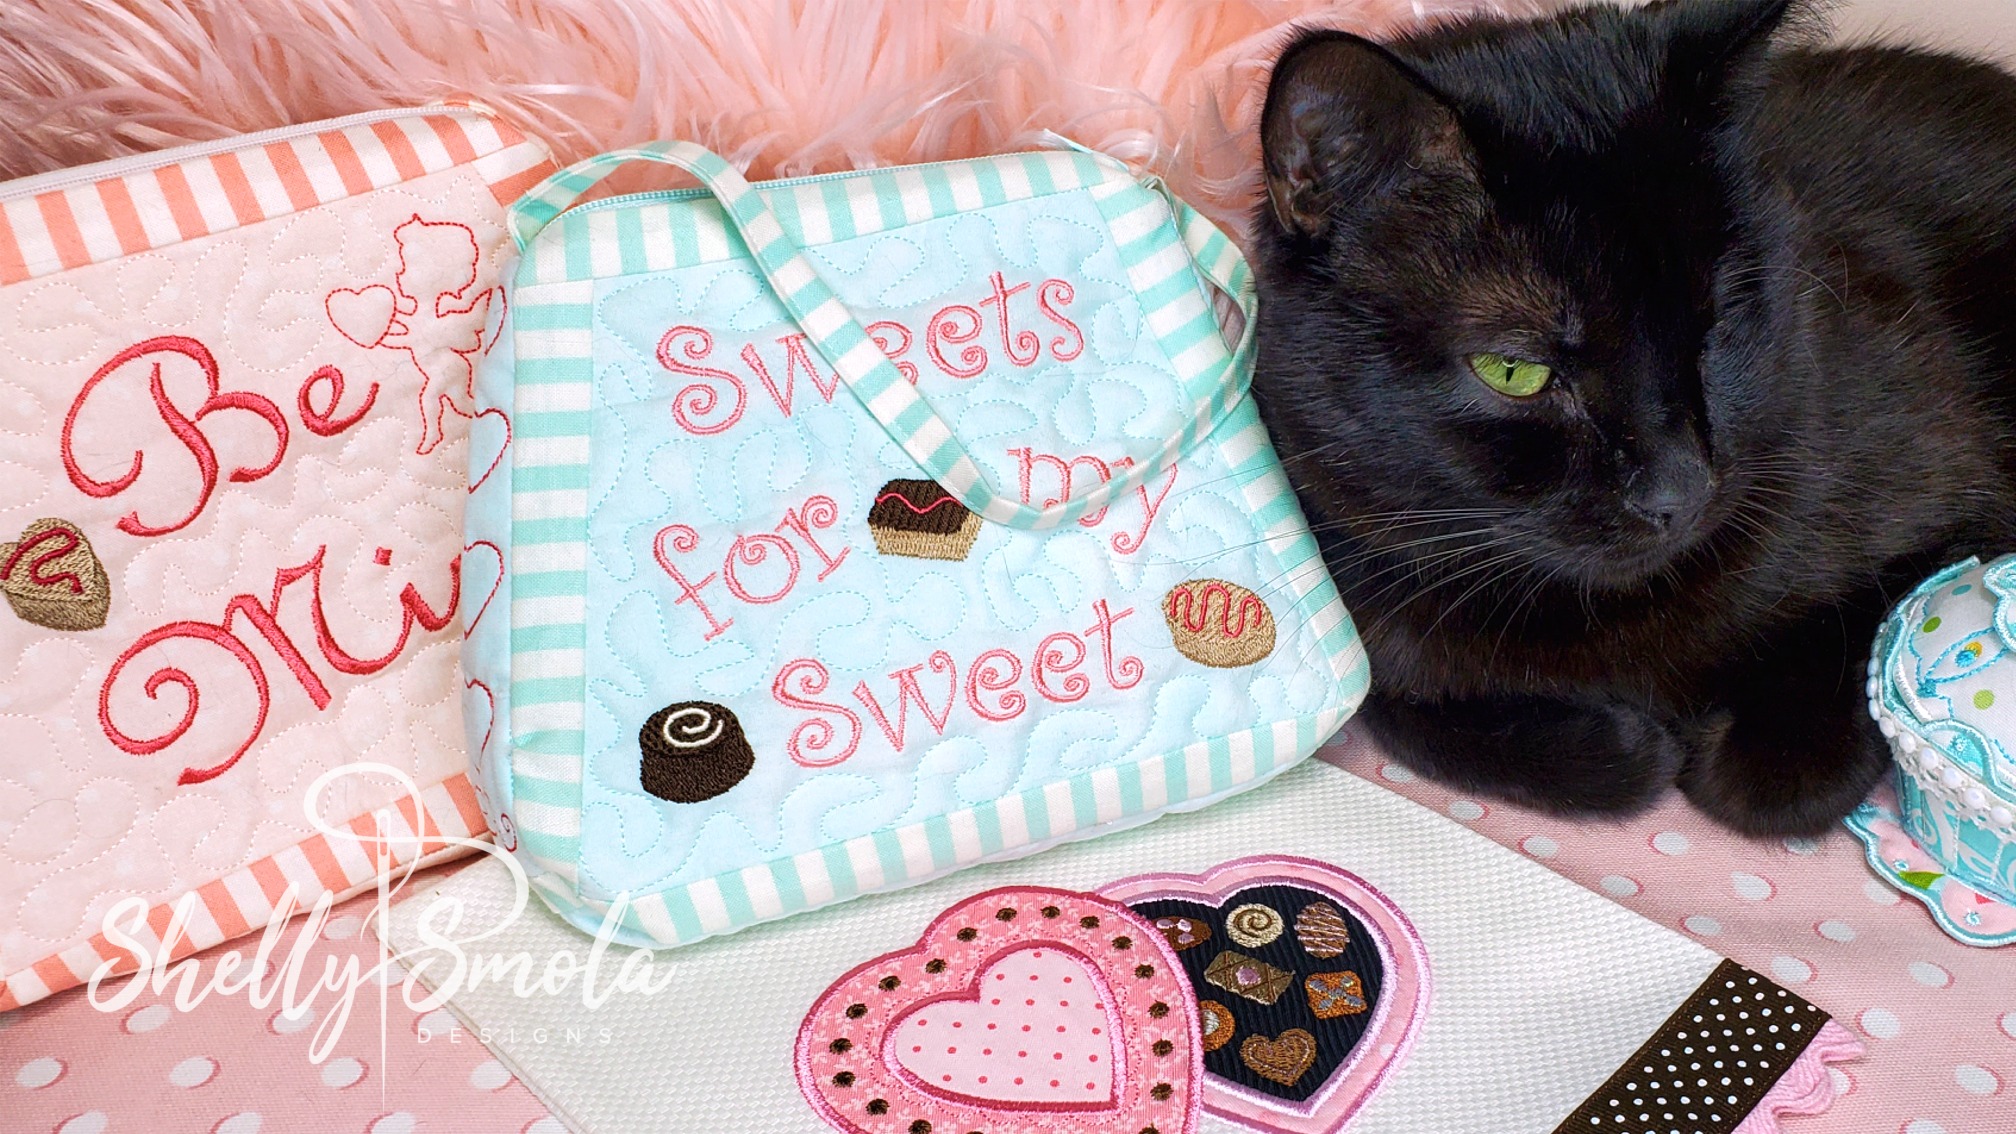 Candy Clutches and Valentine Chocolates by Shelly Smola